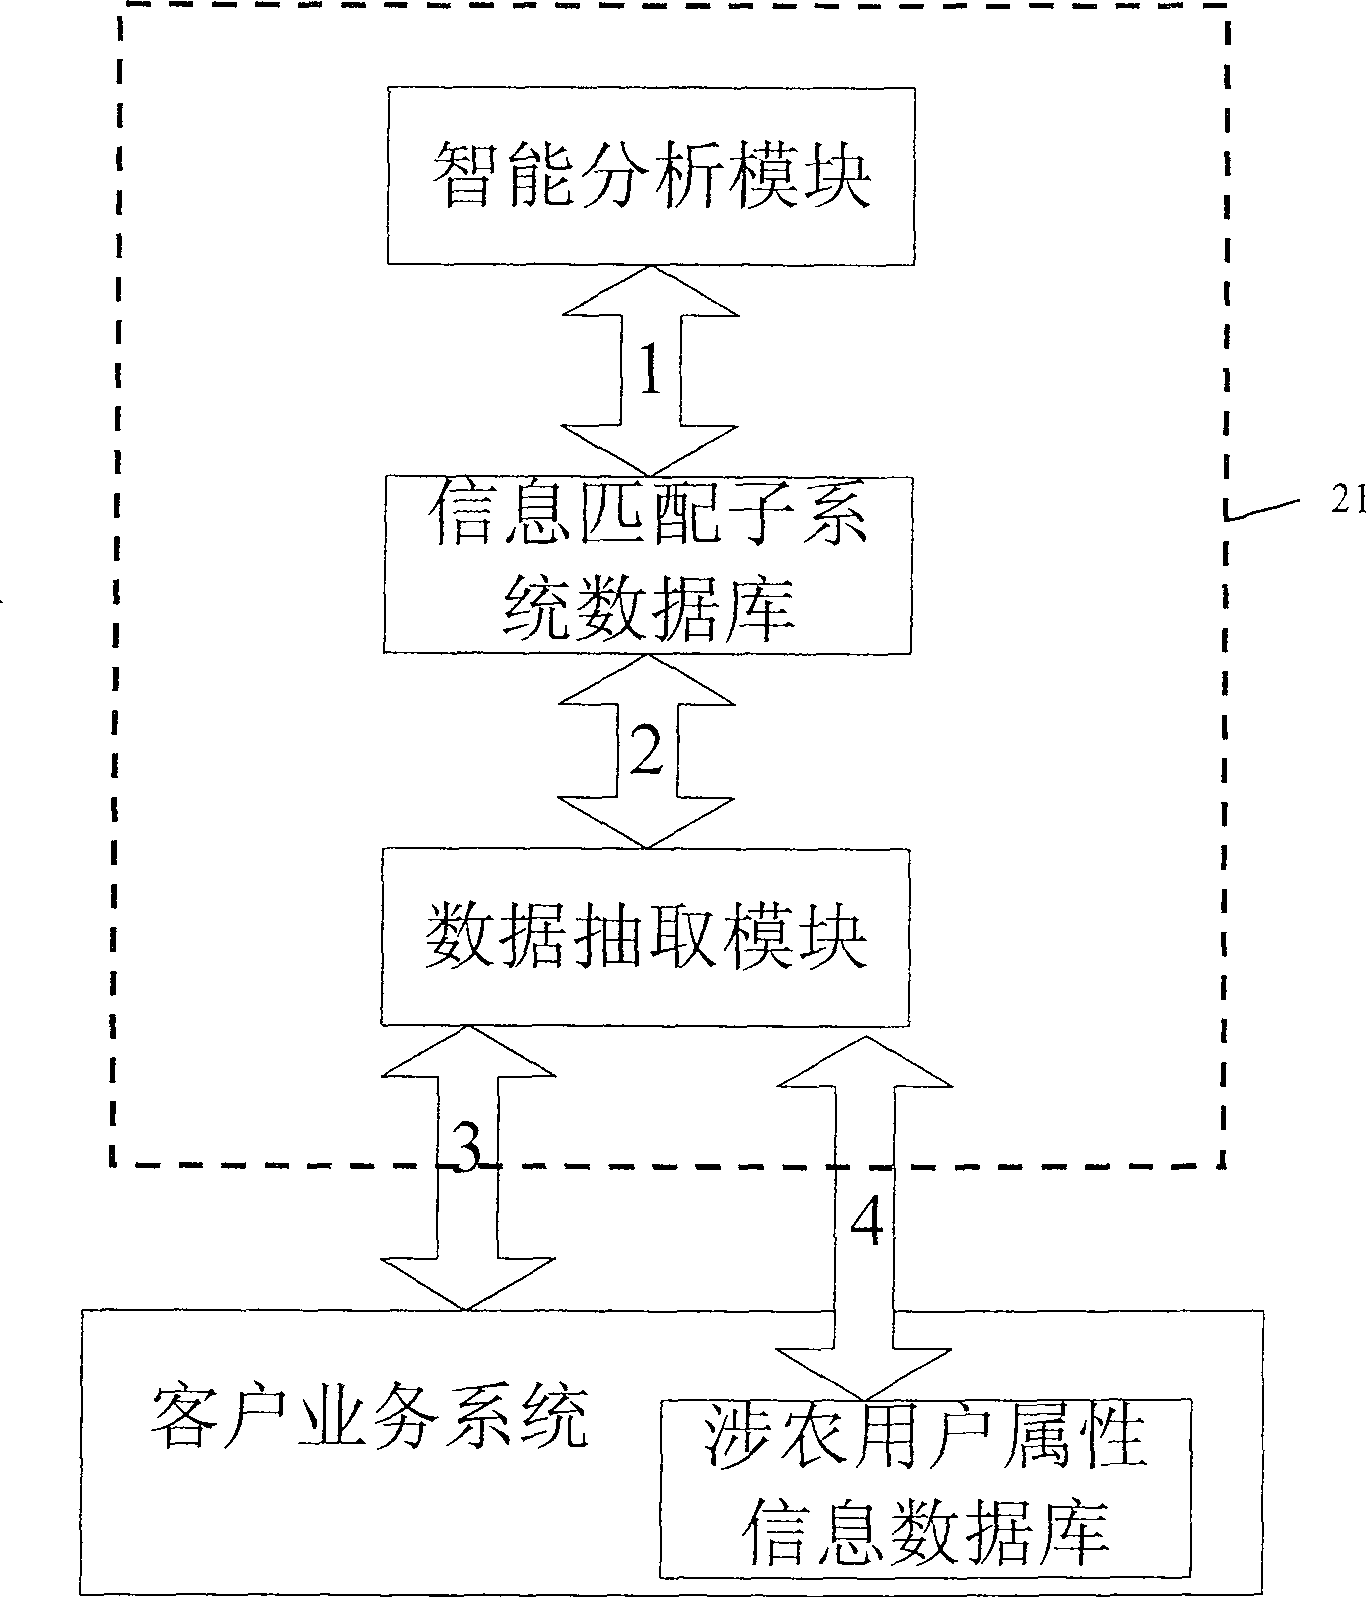 Packet broadcasting system with agricultural information relation and method thereof